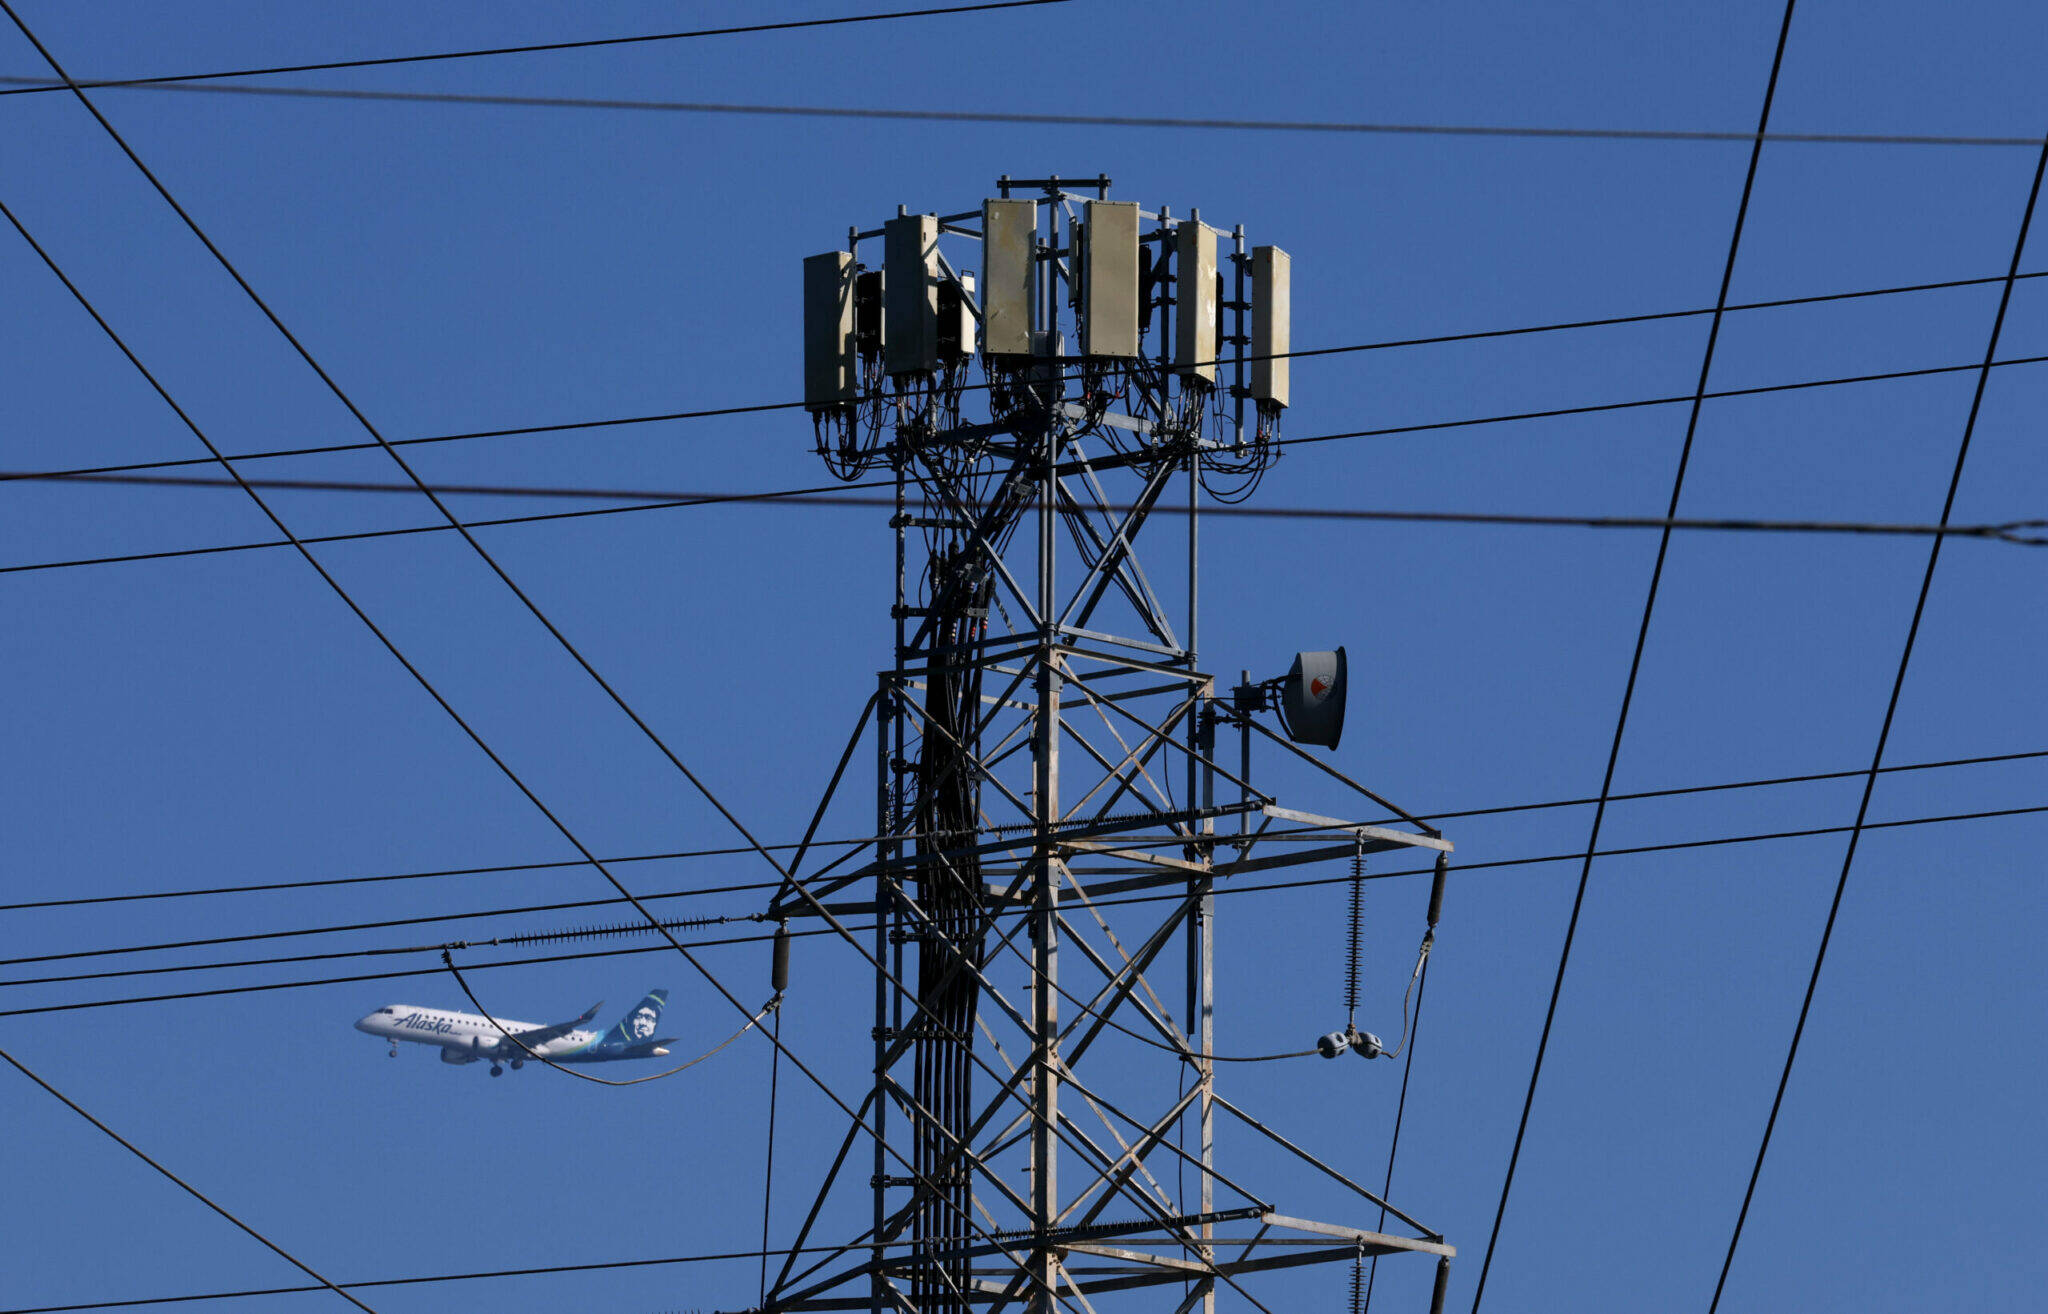 An Alaska Airlines plane flies by a cellular tower. (Photo by Justin Sullivan/Getty Images)